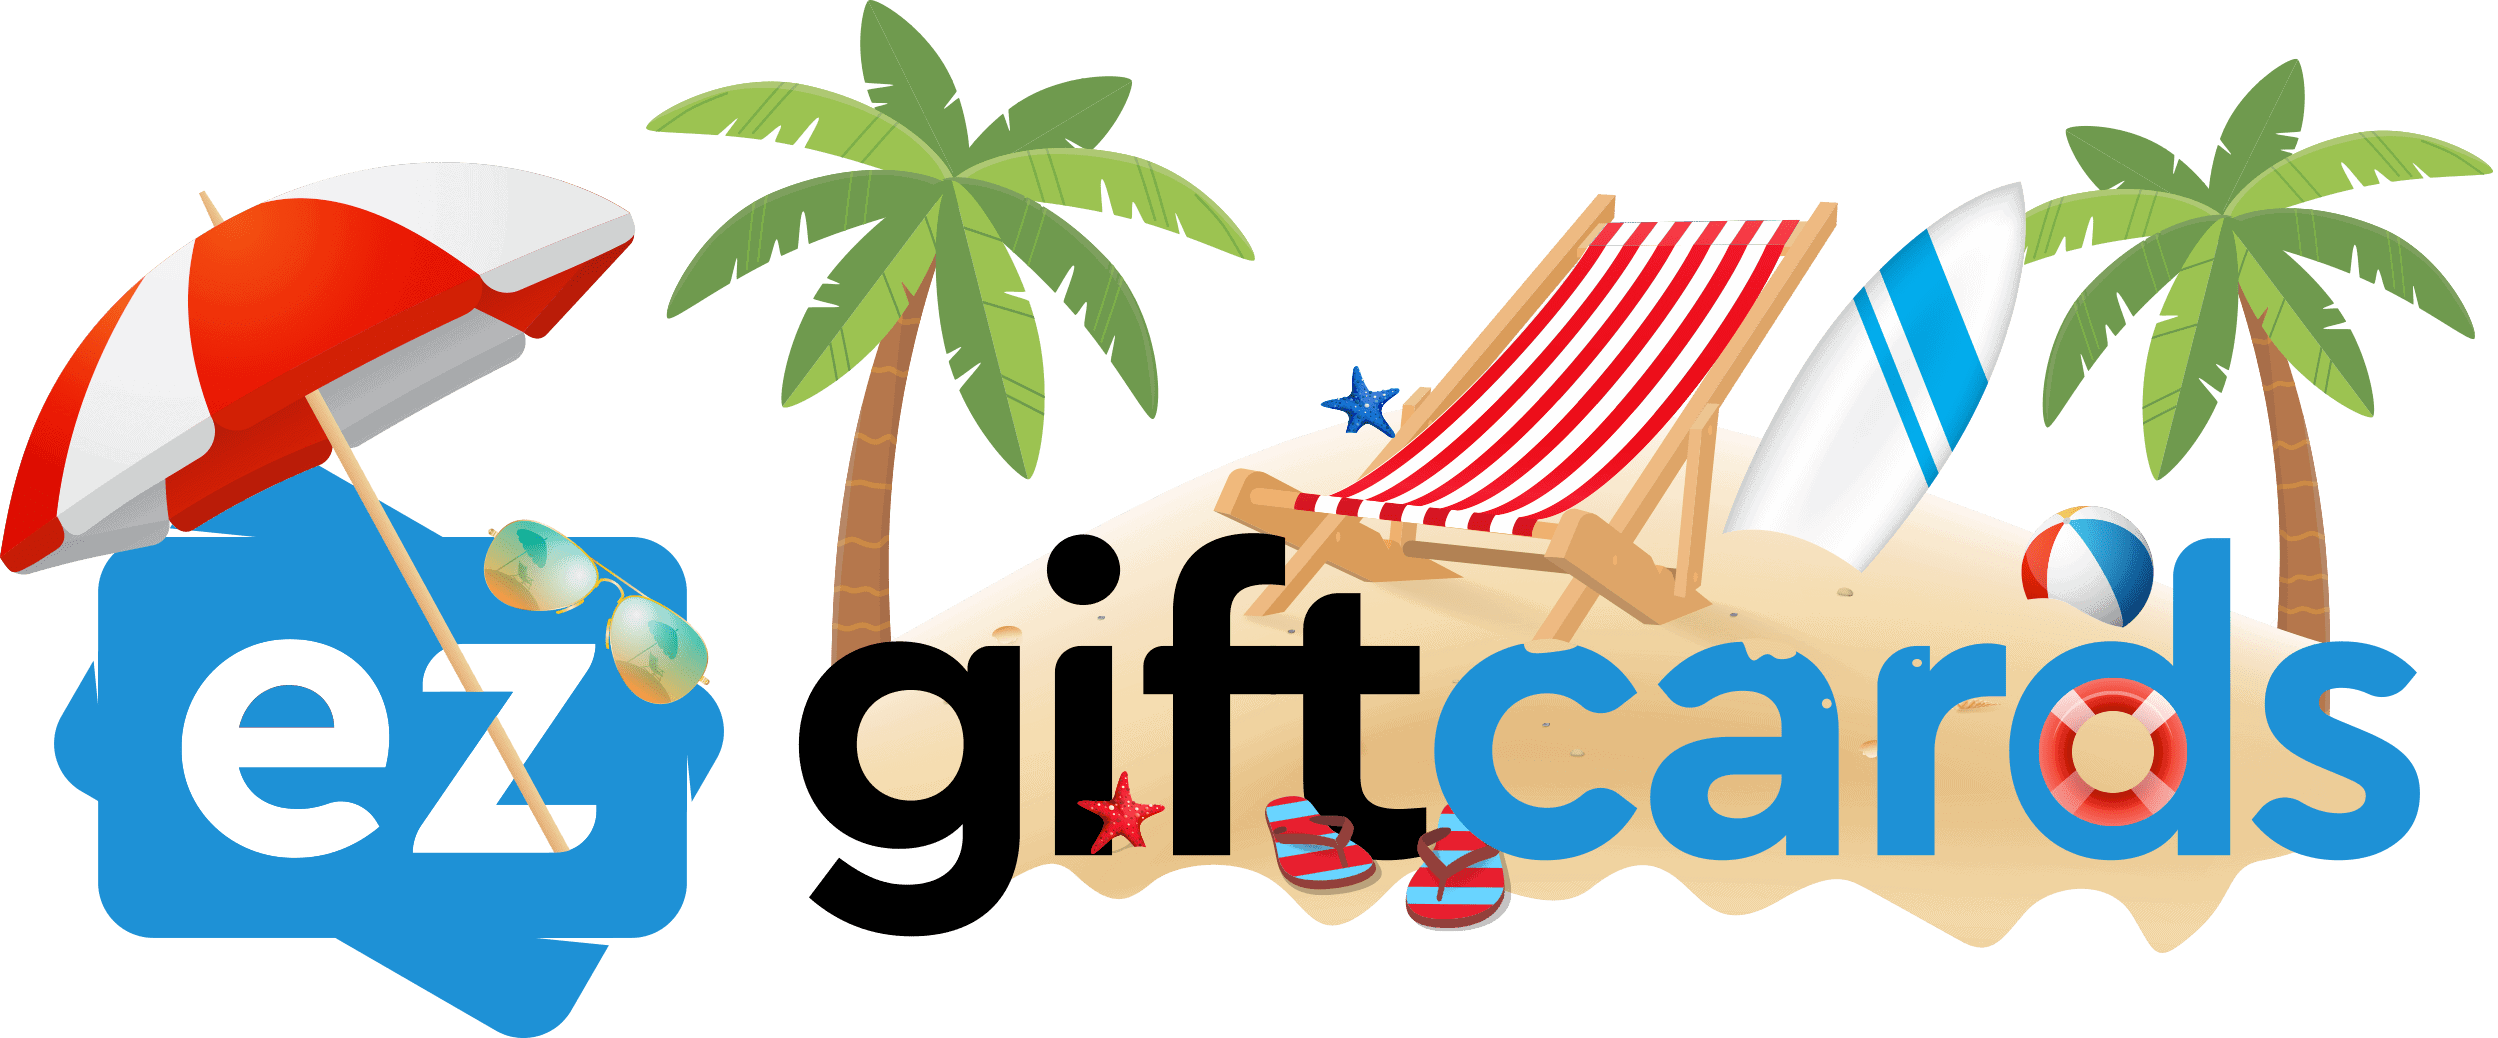 life-experiences-ez-gift-cards